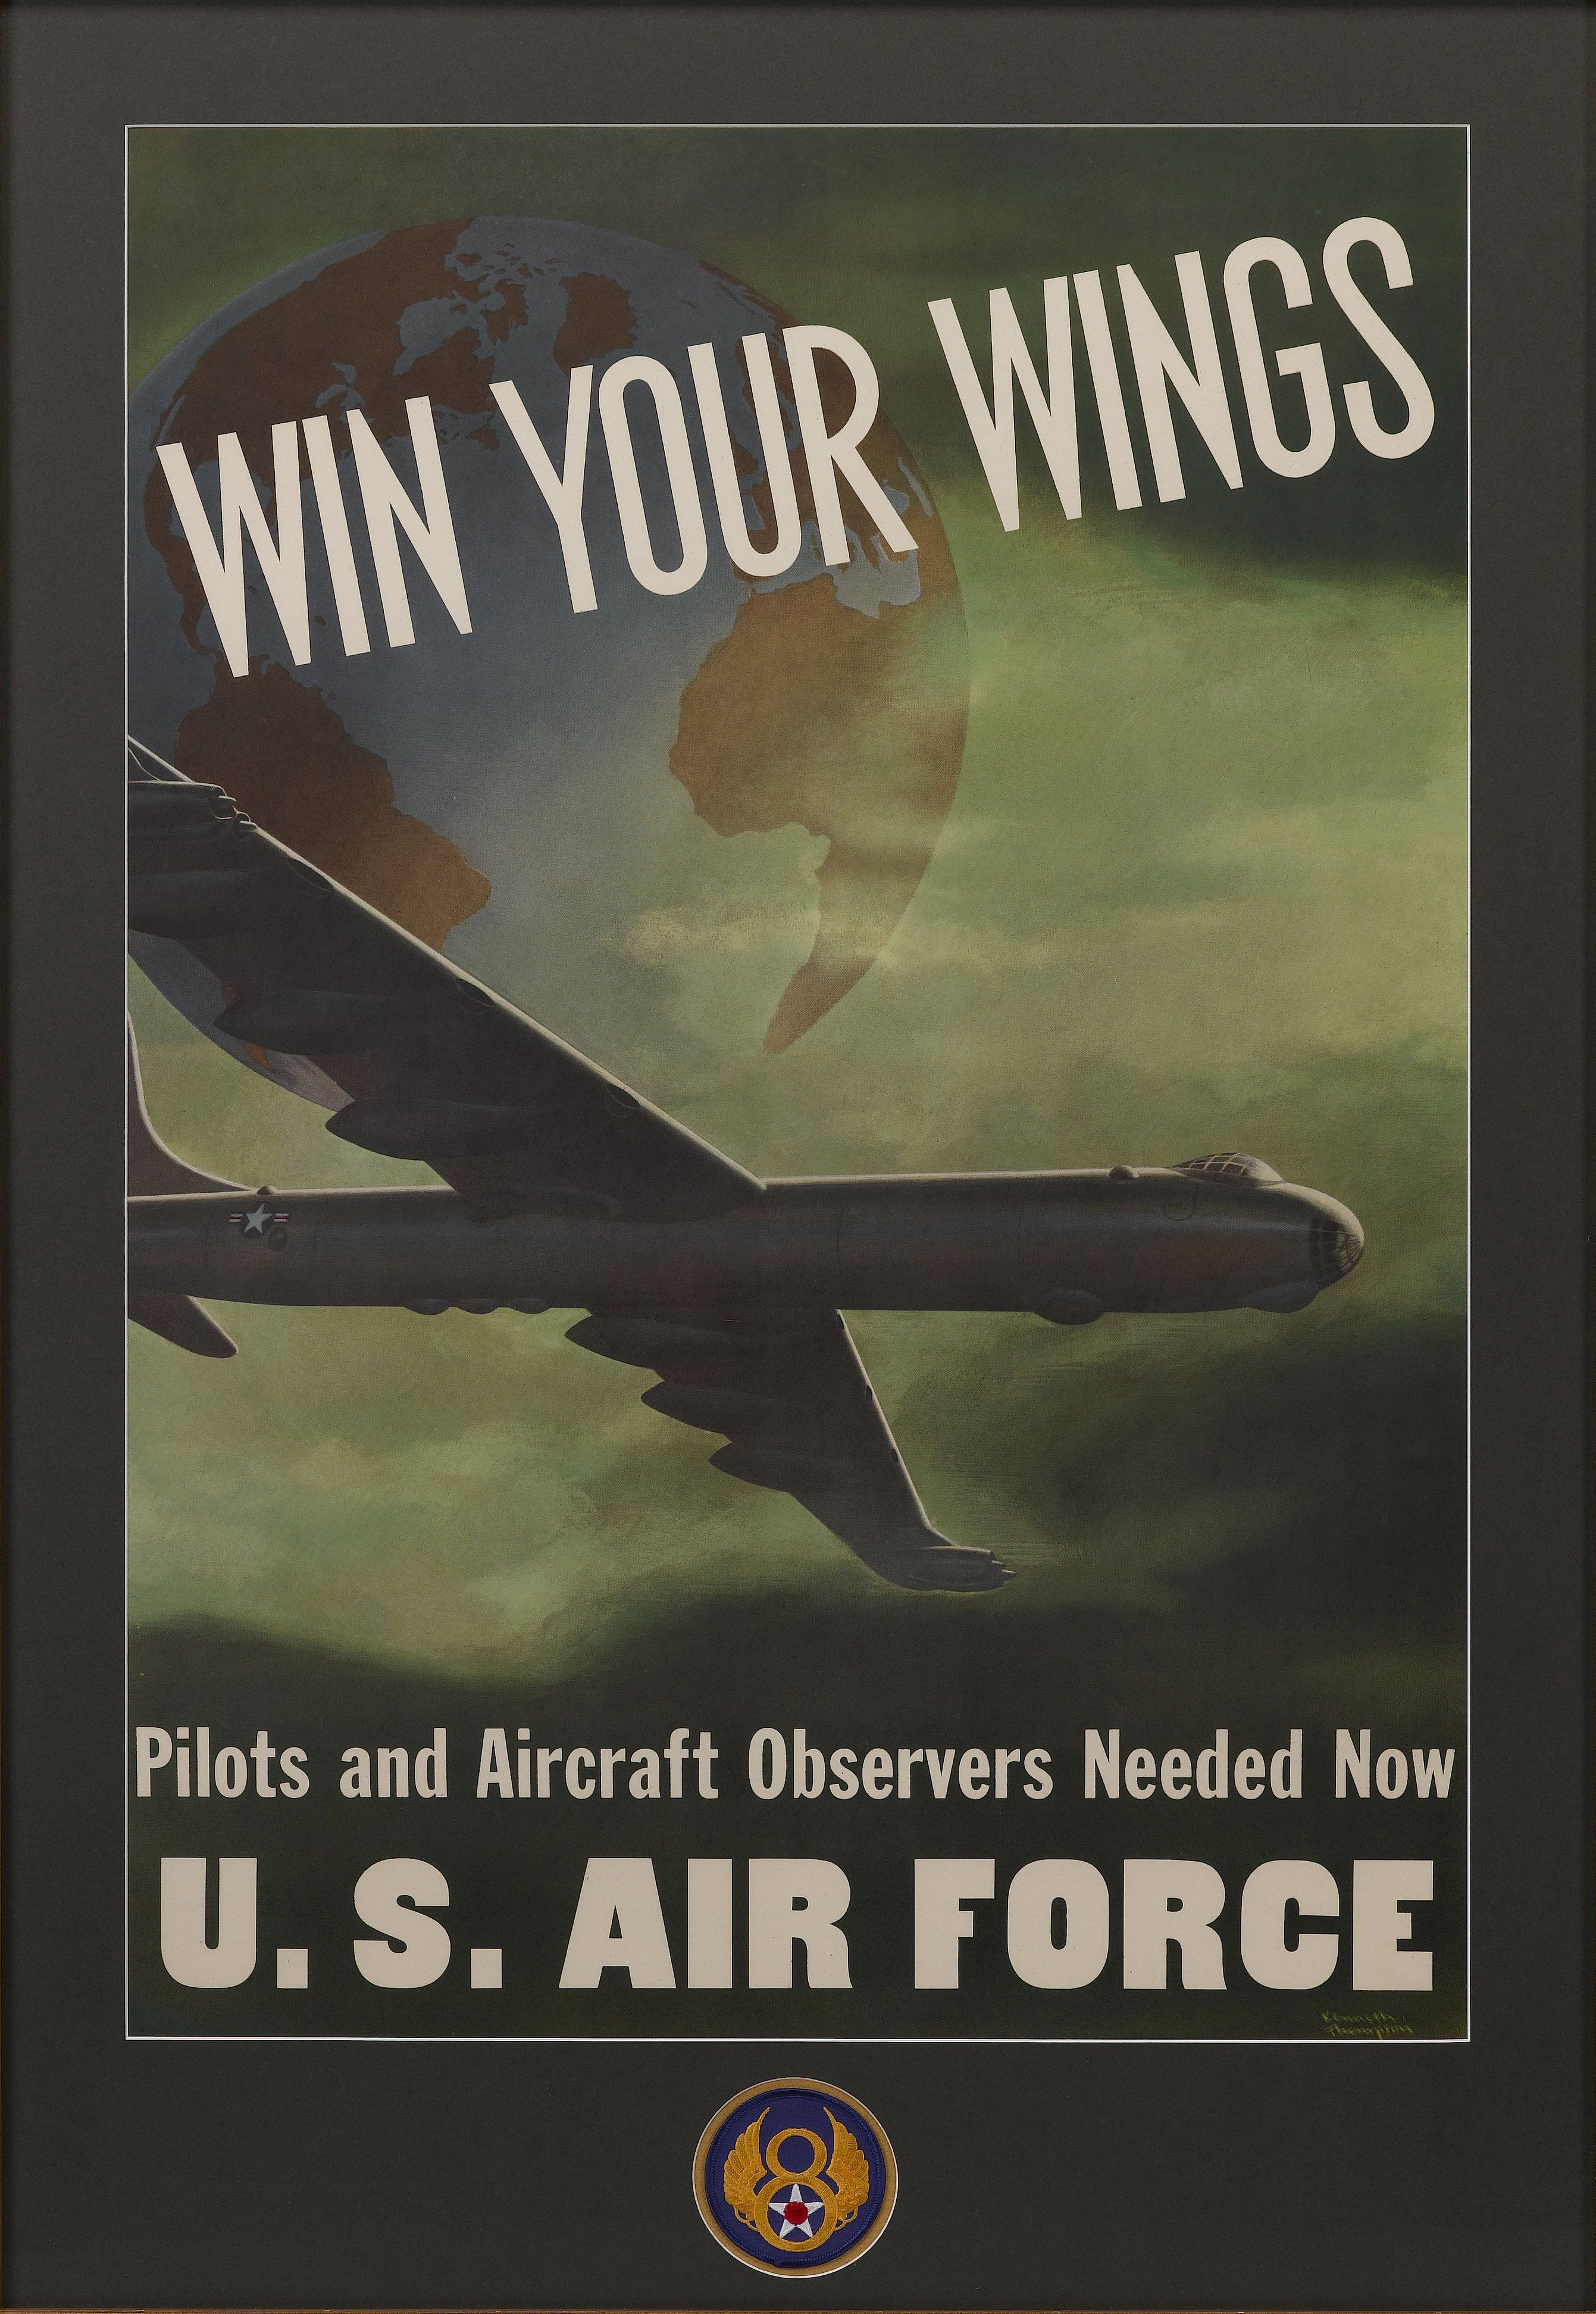 Cold War US Air Force Boeing B 52 Stratofortress Poster Boeing B 36 Peacemaker Wallpaper:2682x3888